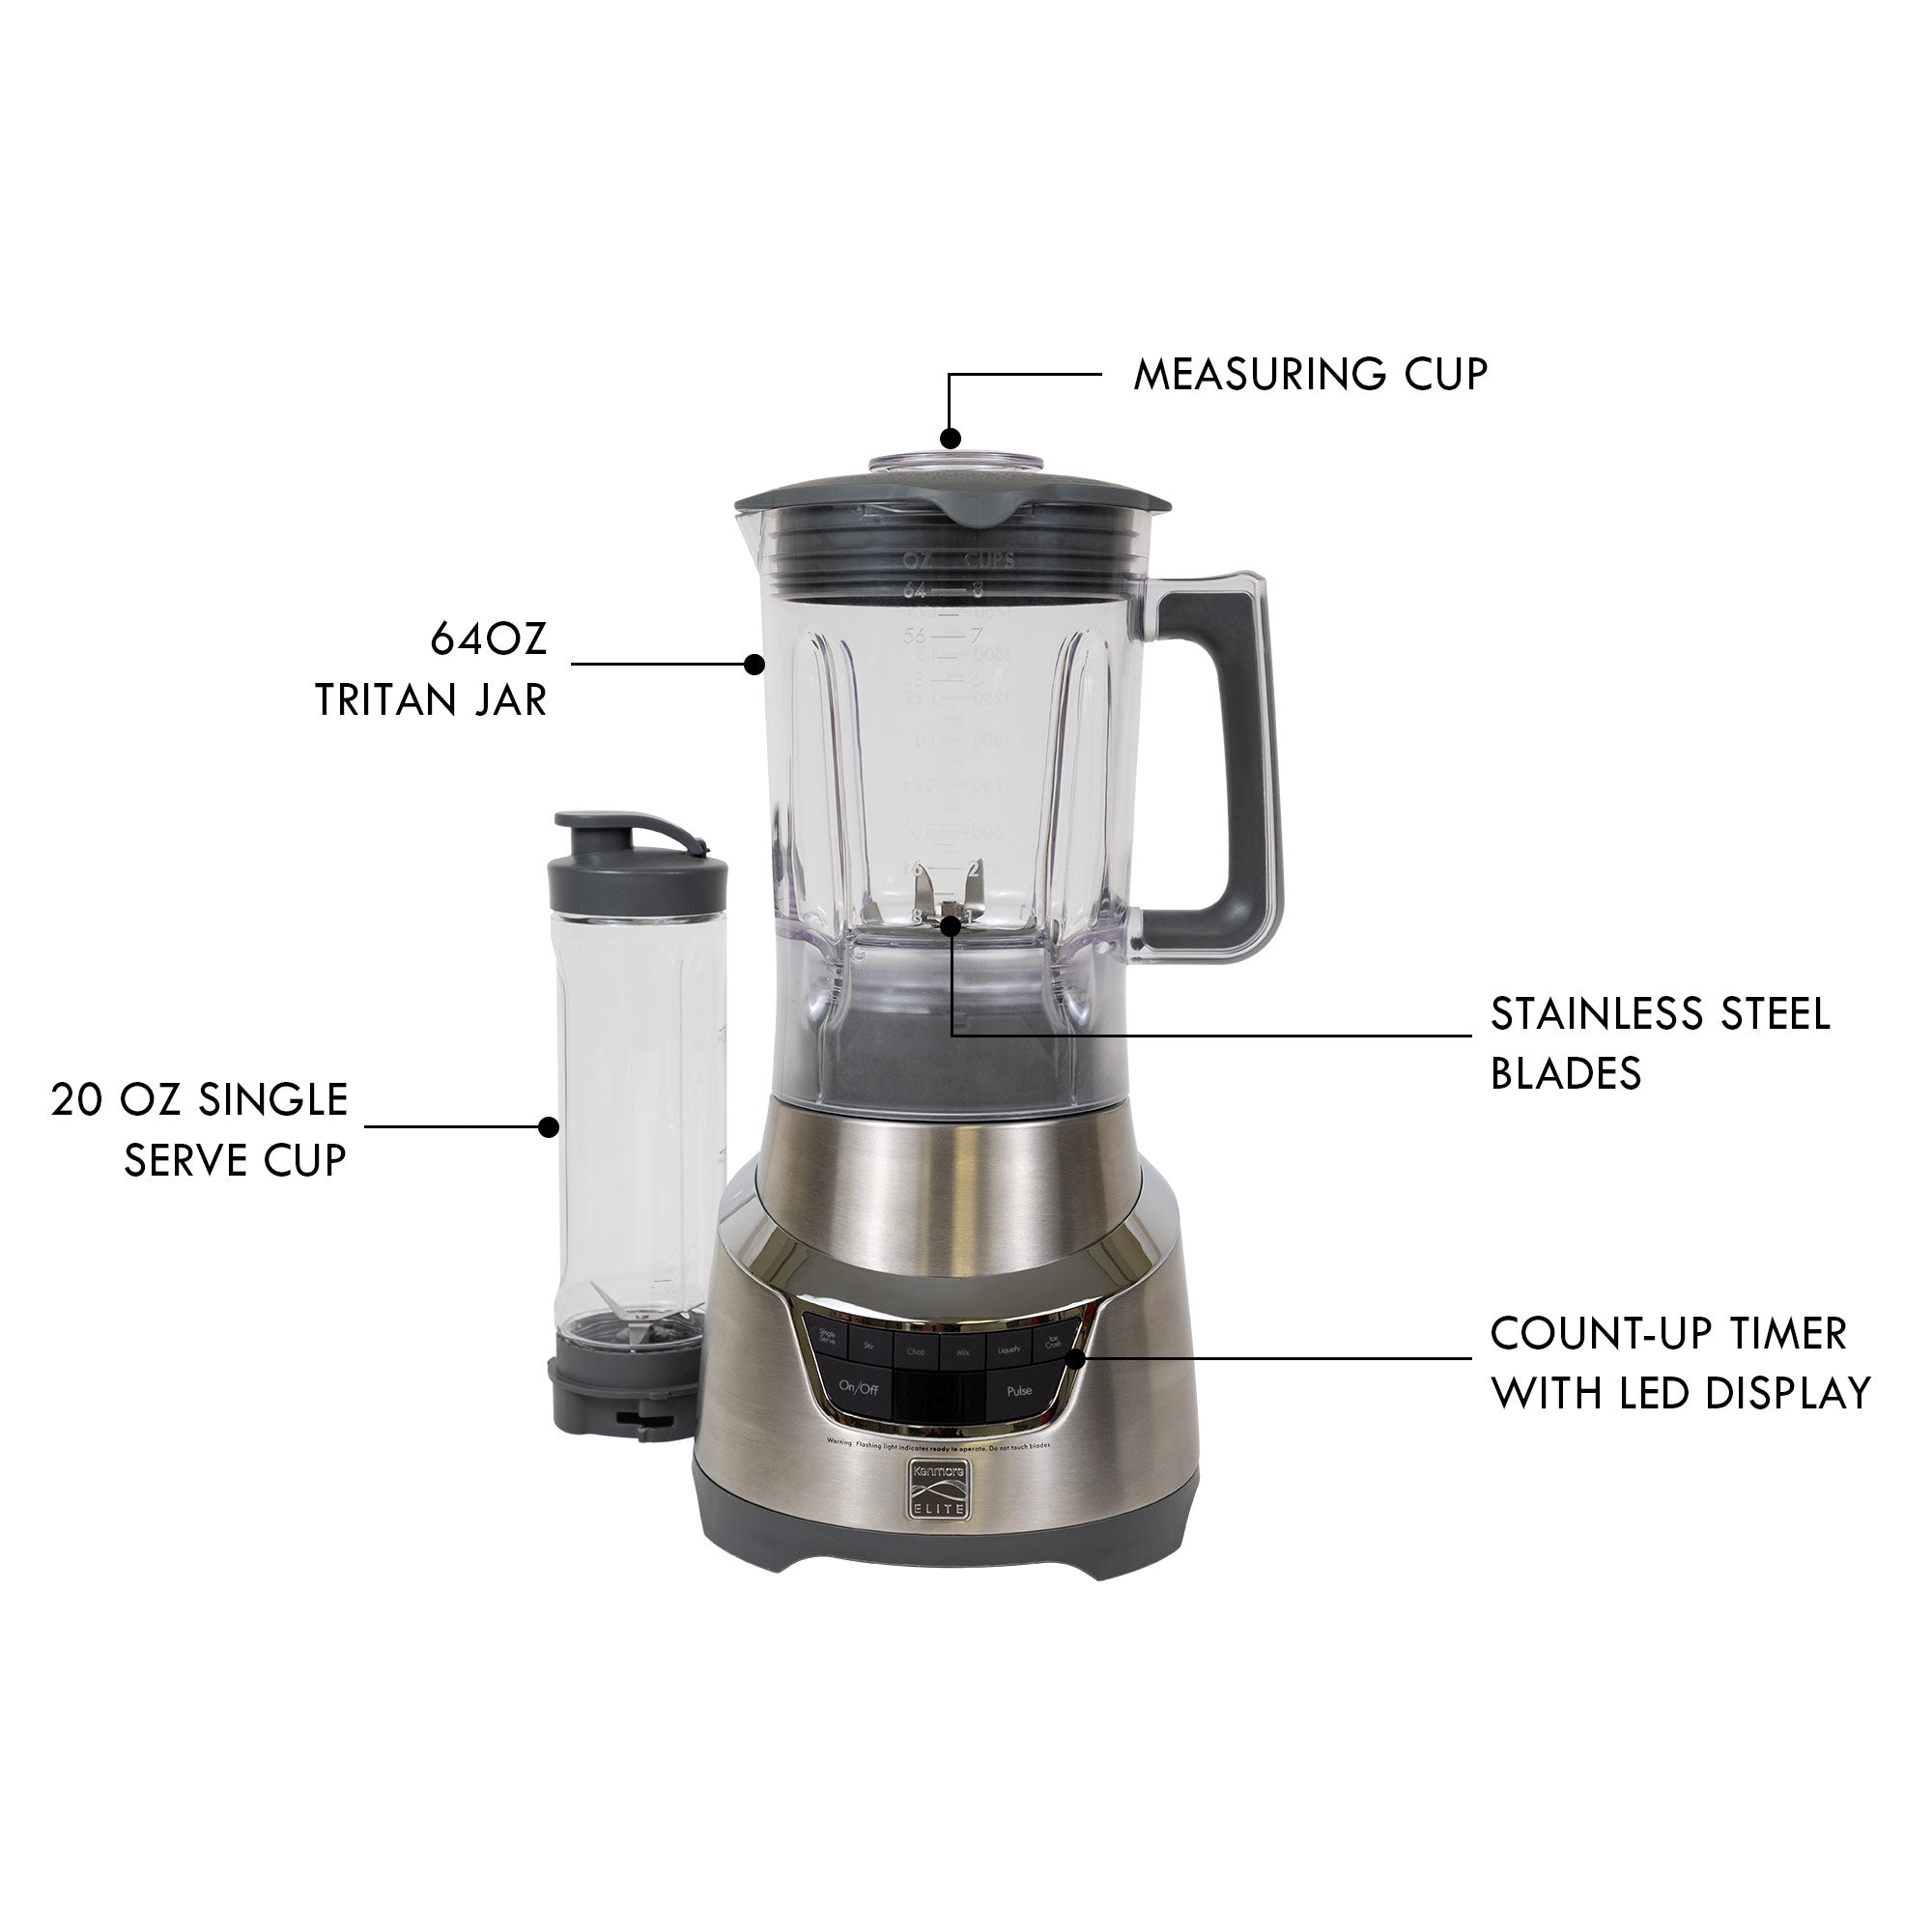 Product shot of Elite 1.3 horsepower blender with pitcher on base and travel blending cup with lid with parts labeled: 20 oz single serve cup; 64 oz Tritan jar; measuring cup; stainless steel blades; count-up timer with LED display